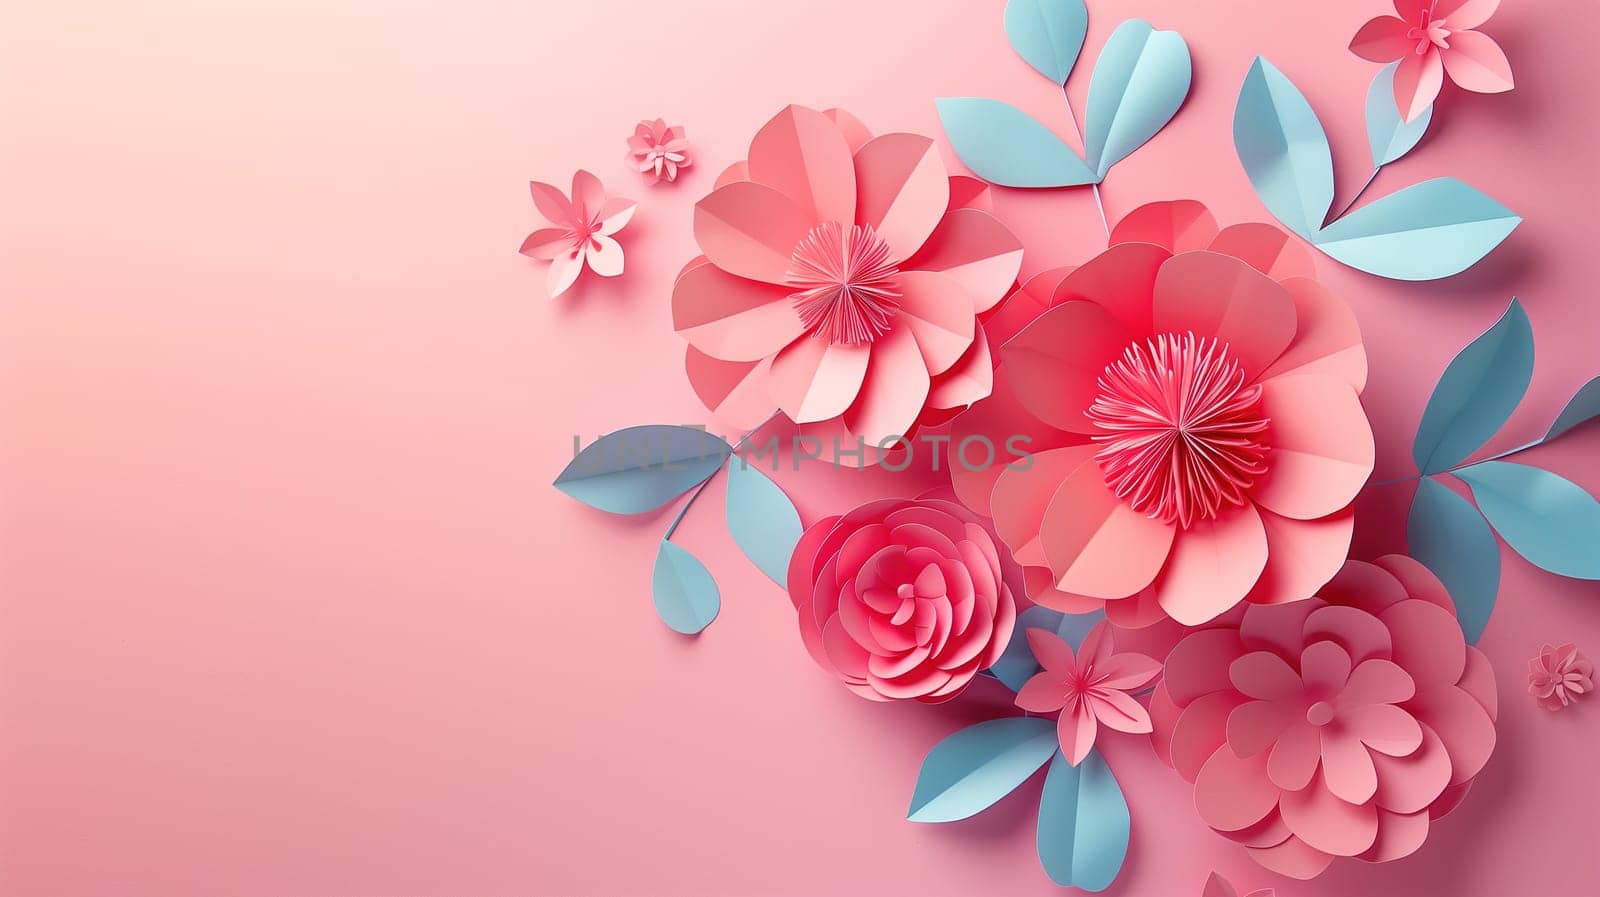 Paper Flowers Arranged on Pink Background by TRMK